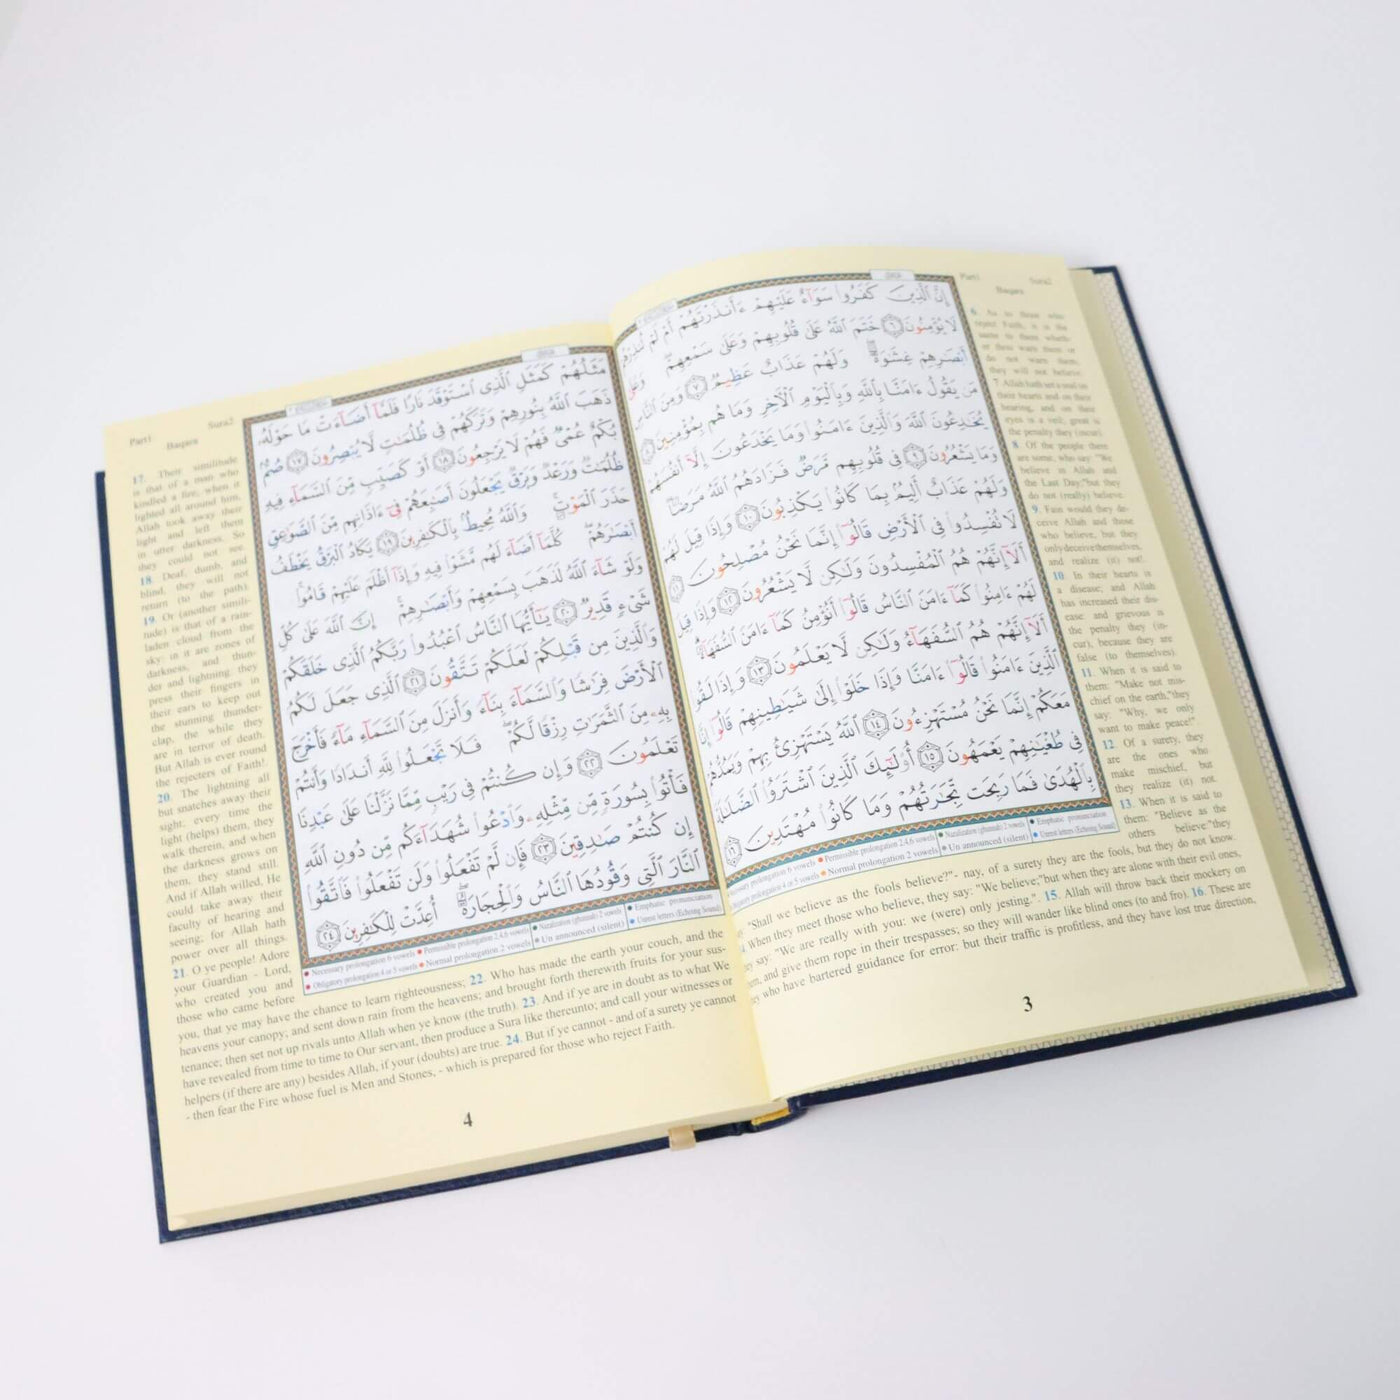 TAJWEED QURAN WITH MEANINGS TRANSLATION IN ENGLISH